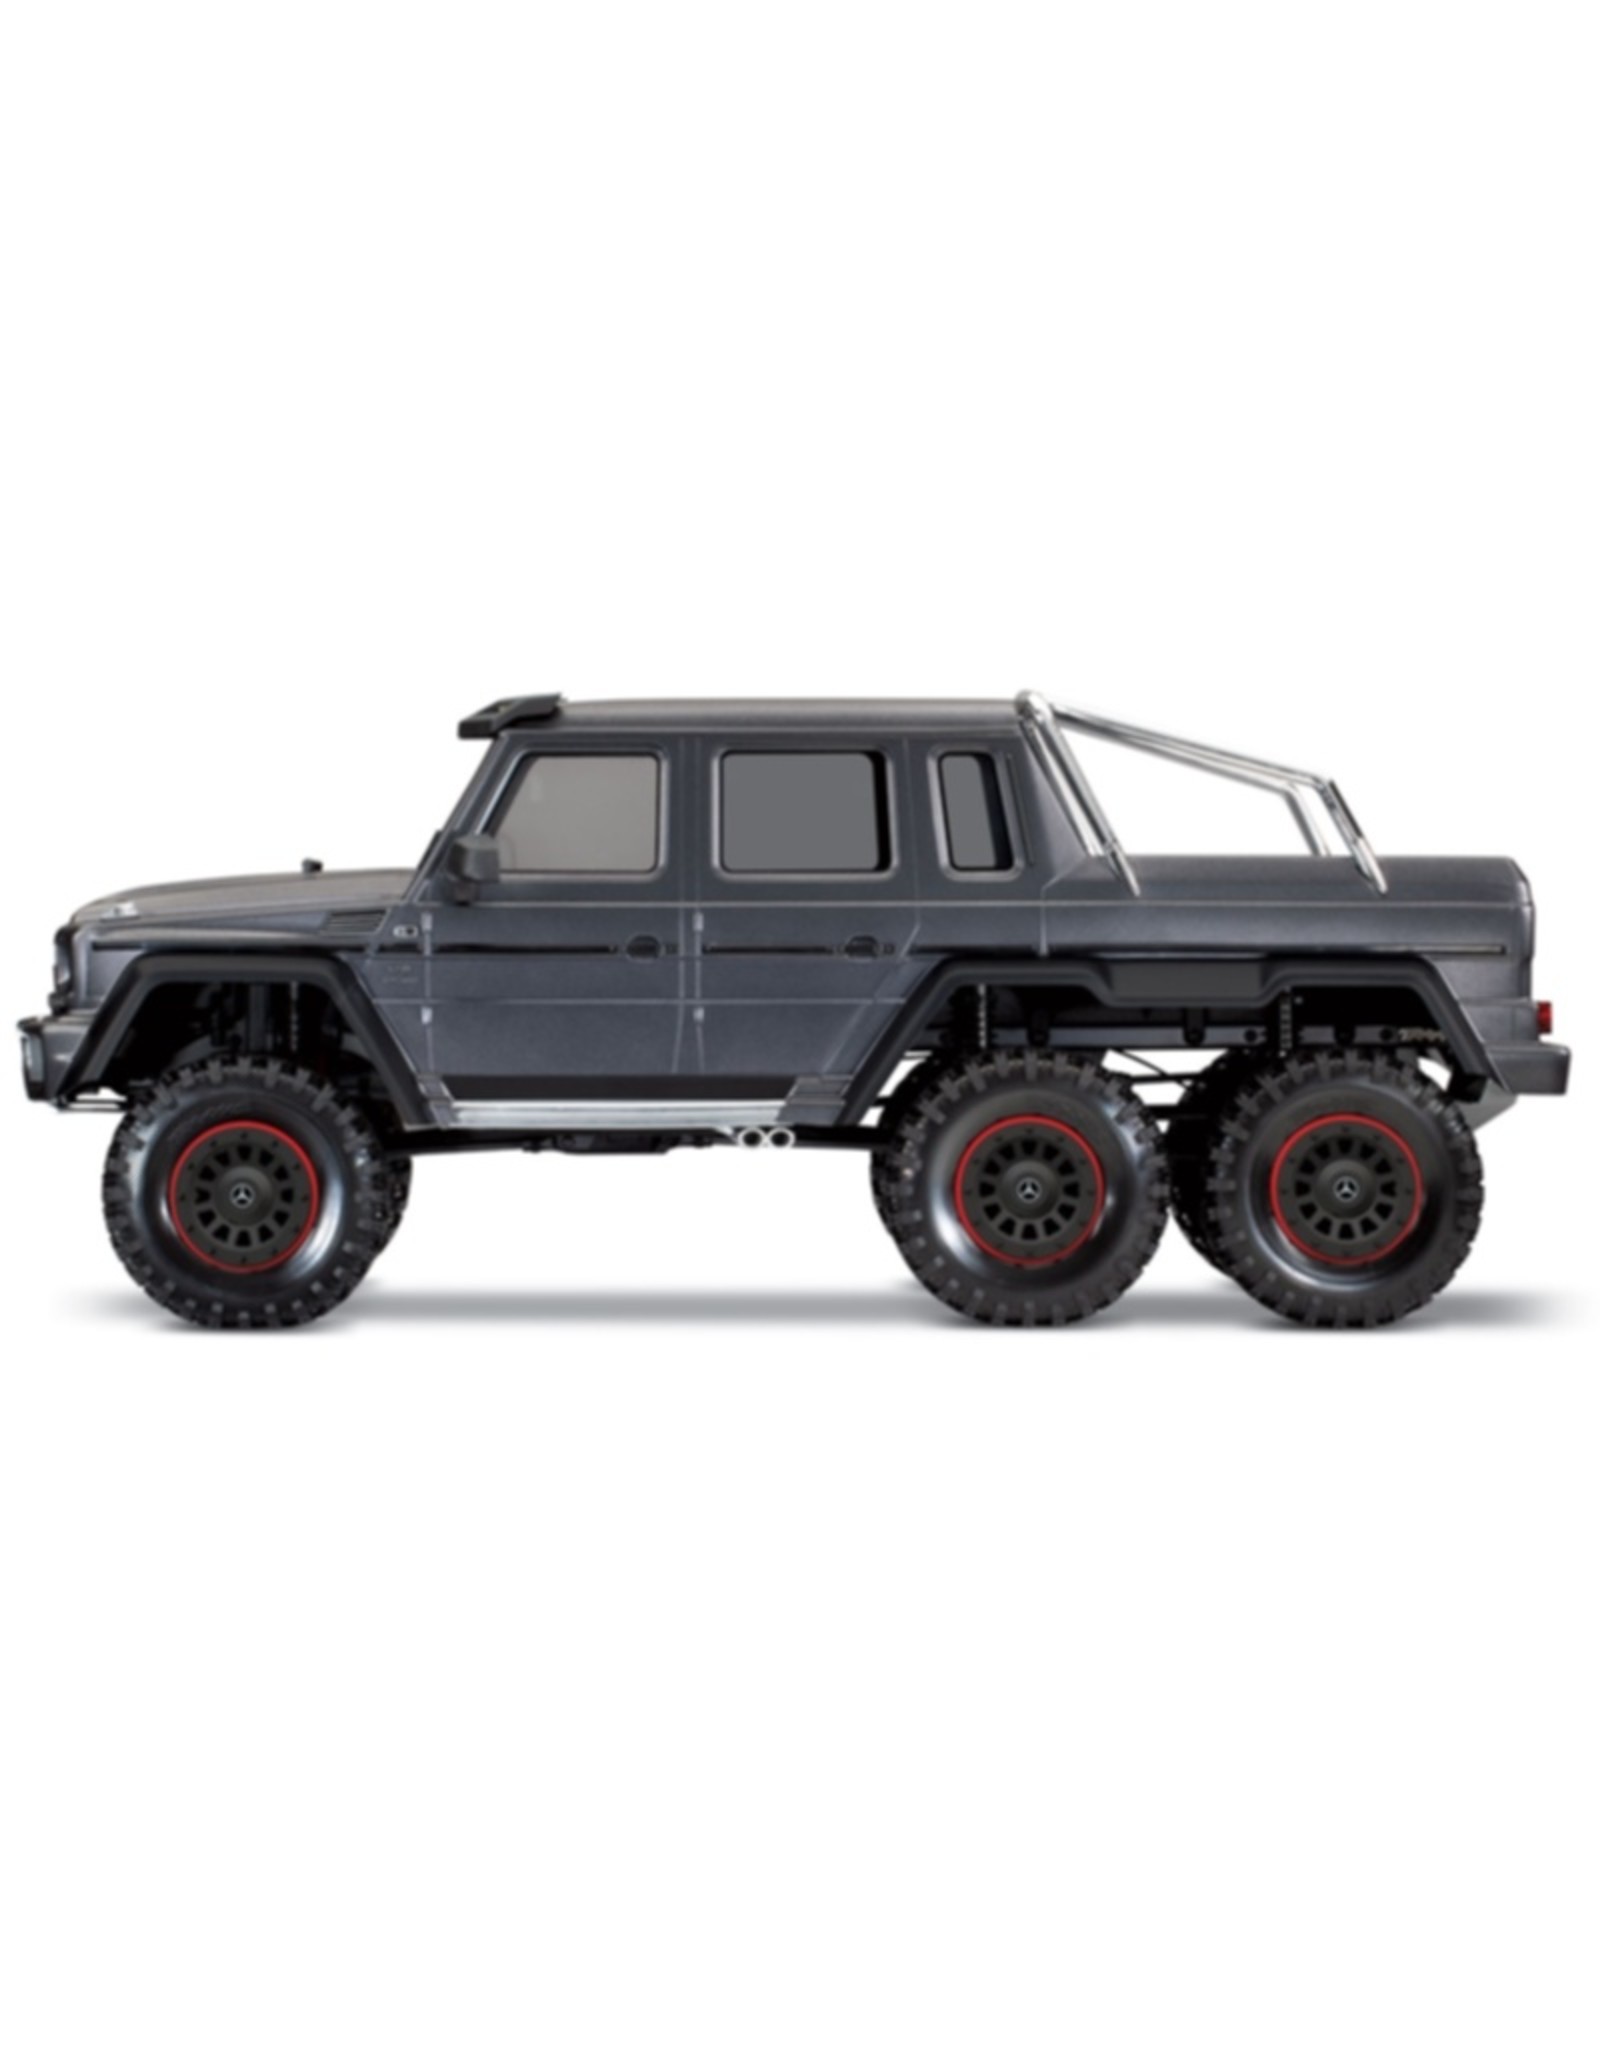 Traxxas TRA88096-4 SILVER TRX-6™ Scale and Trail™ Crawler with Mercedes-Benz® G 63® AMG Body: 1/10 Scale 6X6 Electric Trail Truck. Ready-to-Drive® with TQi Traxxas Link™ Enabled 2.4GHz Radio System, XL-5 HV ESC (fwd/rev), and Titan® 550 motor.